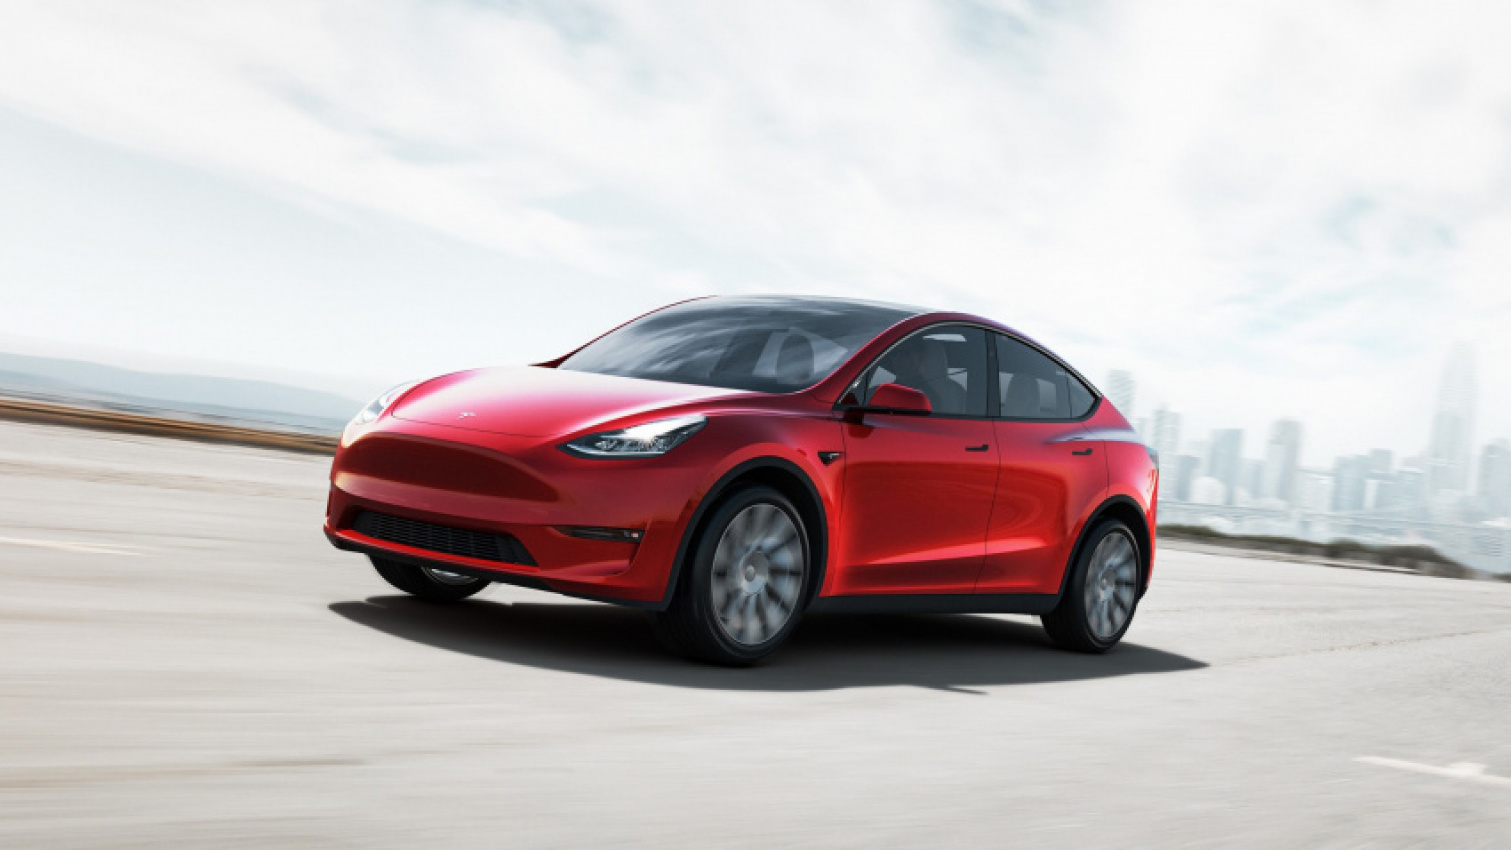 news, tesla, cars, vnex, a cheaper tesla model y could be on the way